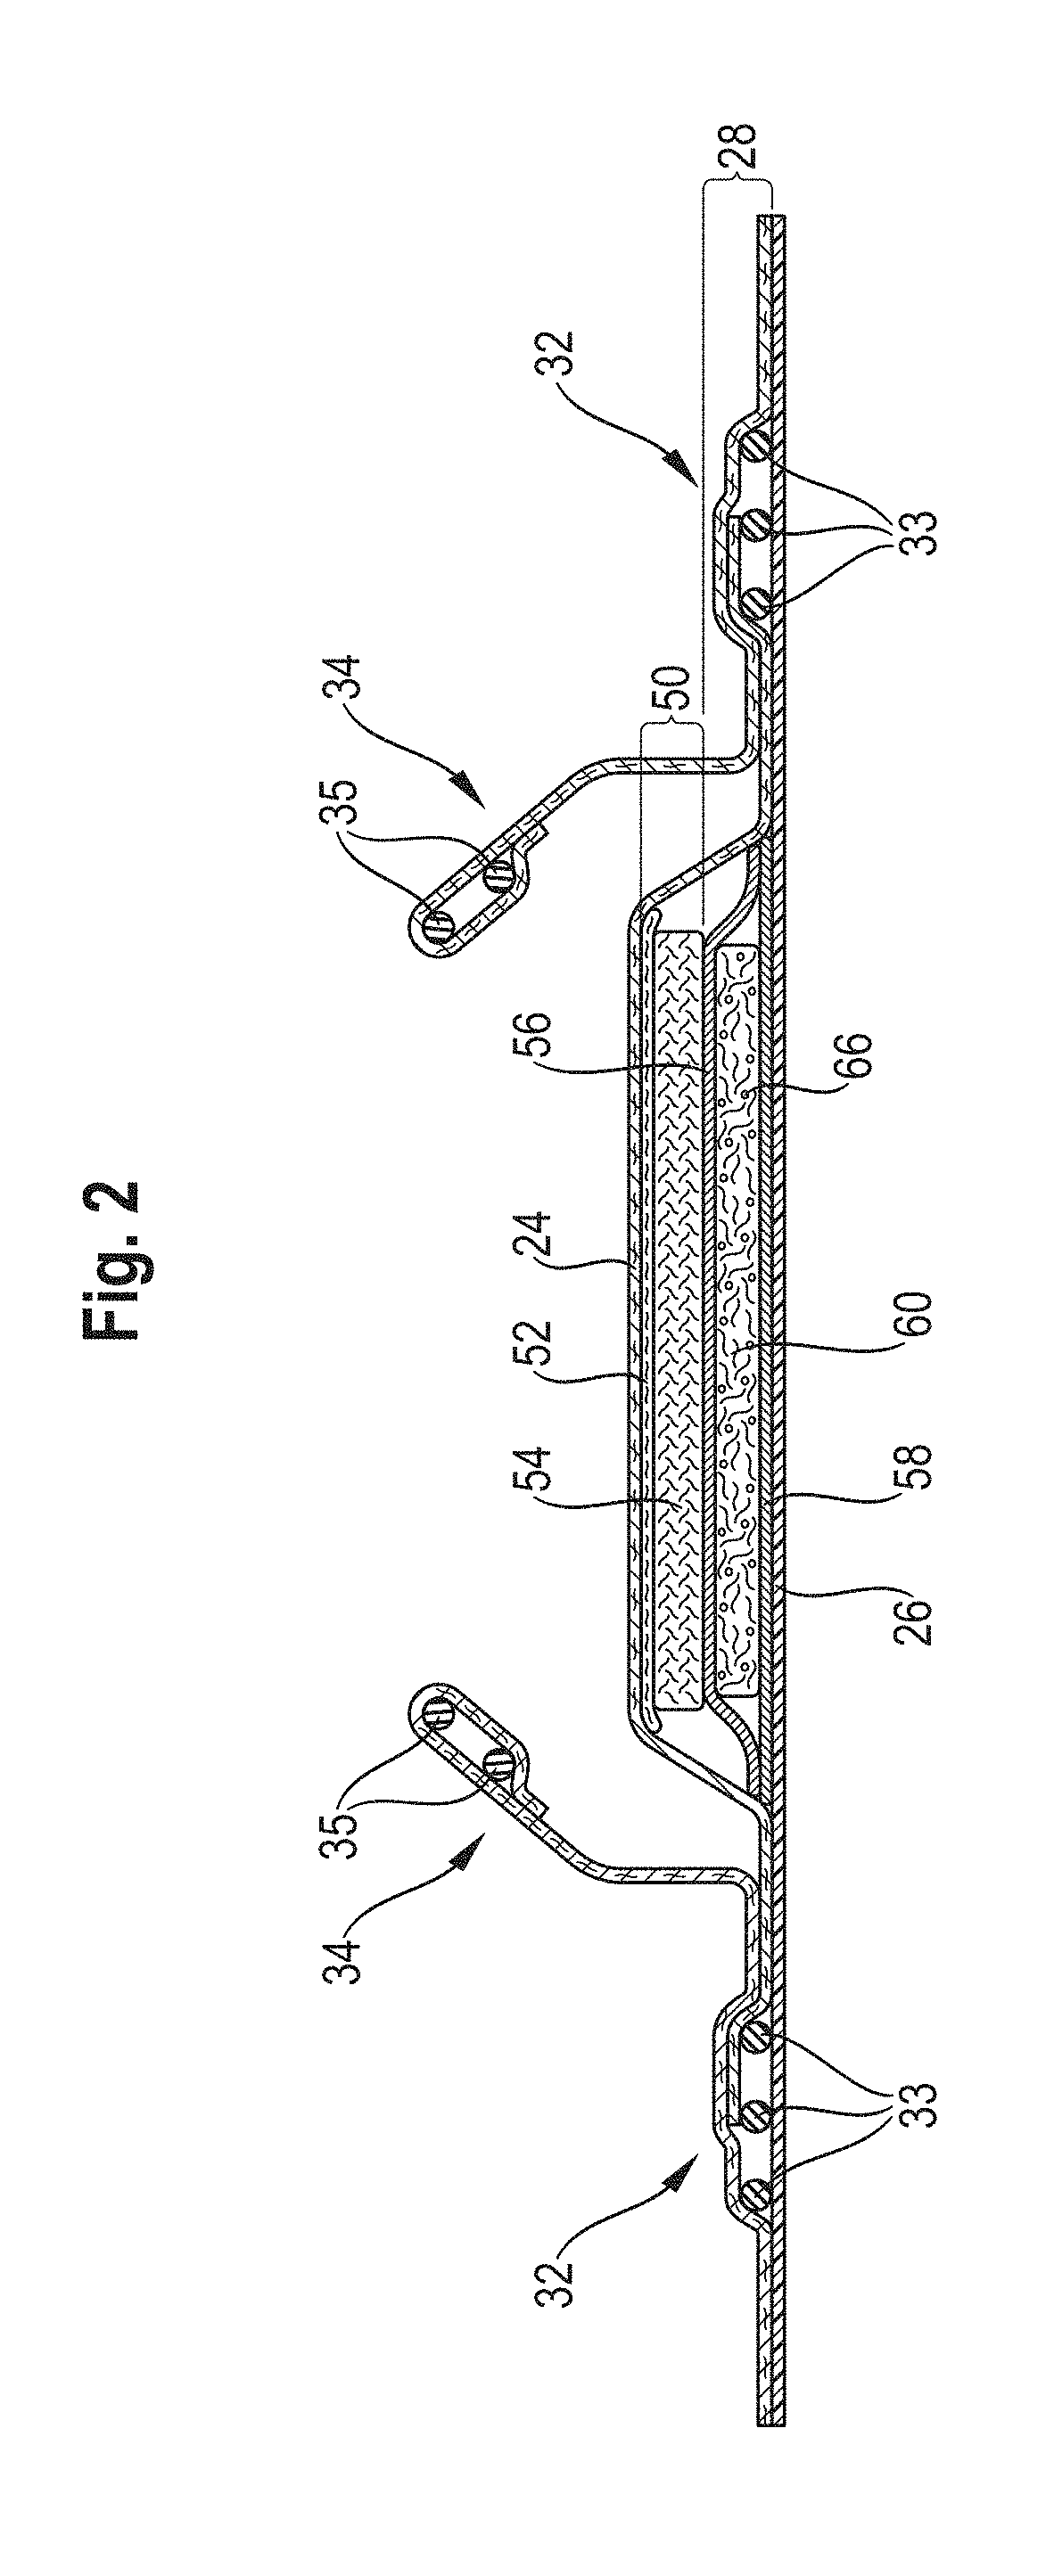 Agglomerated superabsorbent polymer particles comprising clay platelets with edge modification and/or surface modification